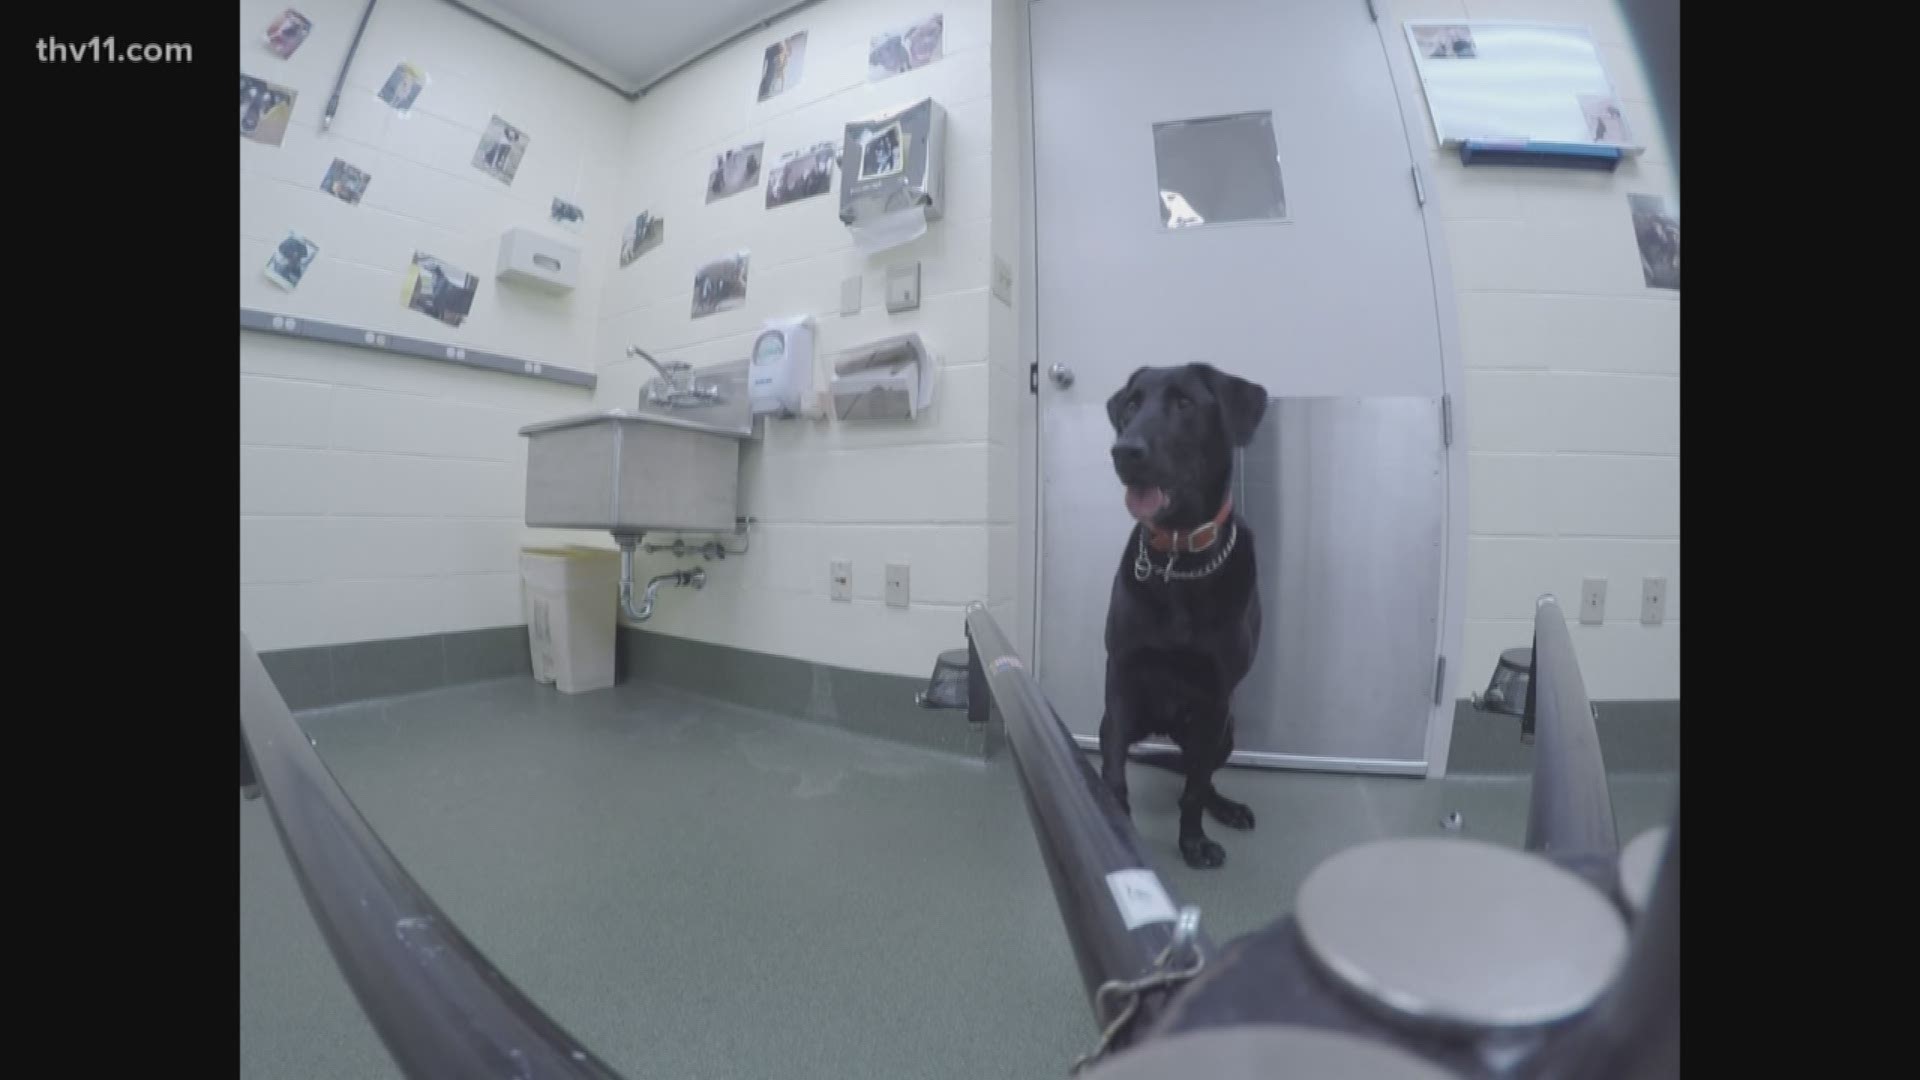 Research out of UAMS is using dogs to detect cancer.